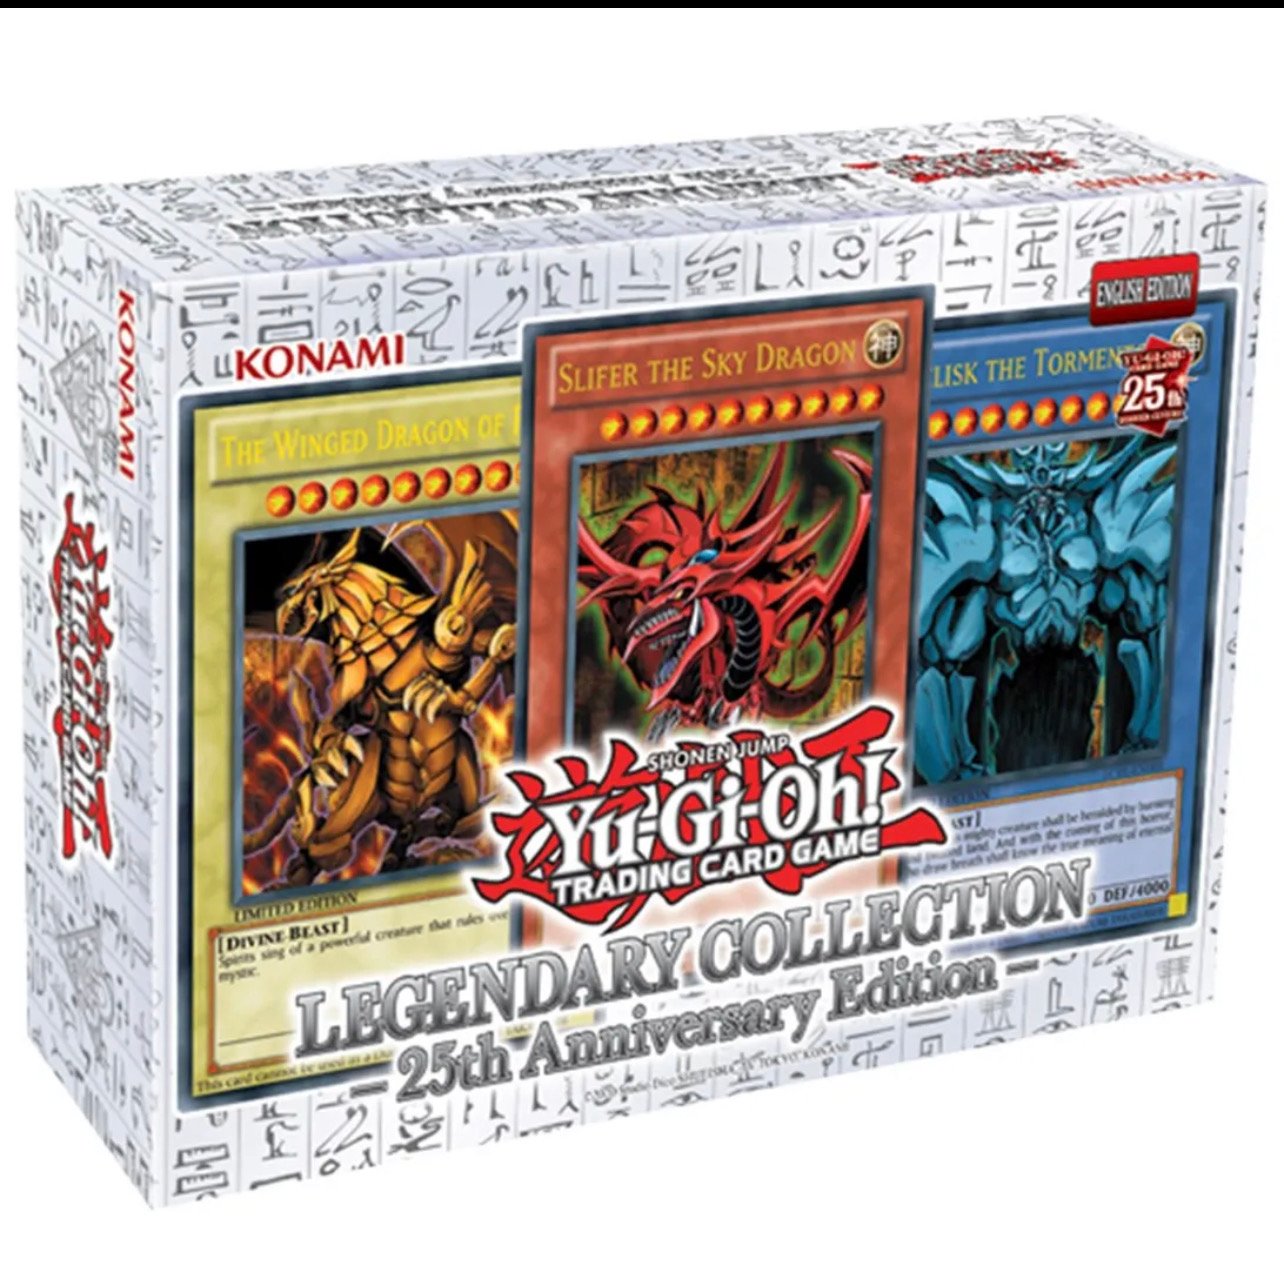 Legendary Collection: 25th Anniversary Edition Box - Legendary Collection: 25th Anniversary Edition 